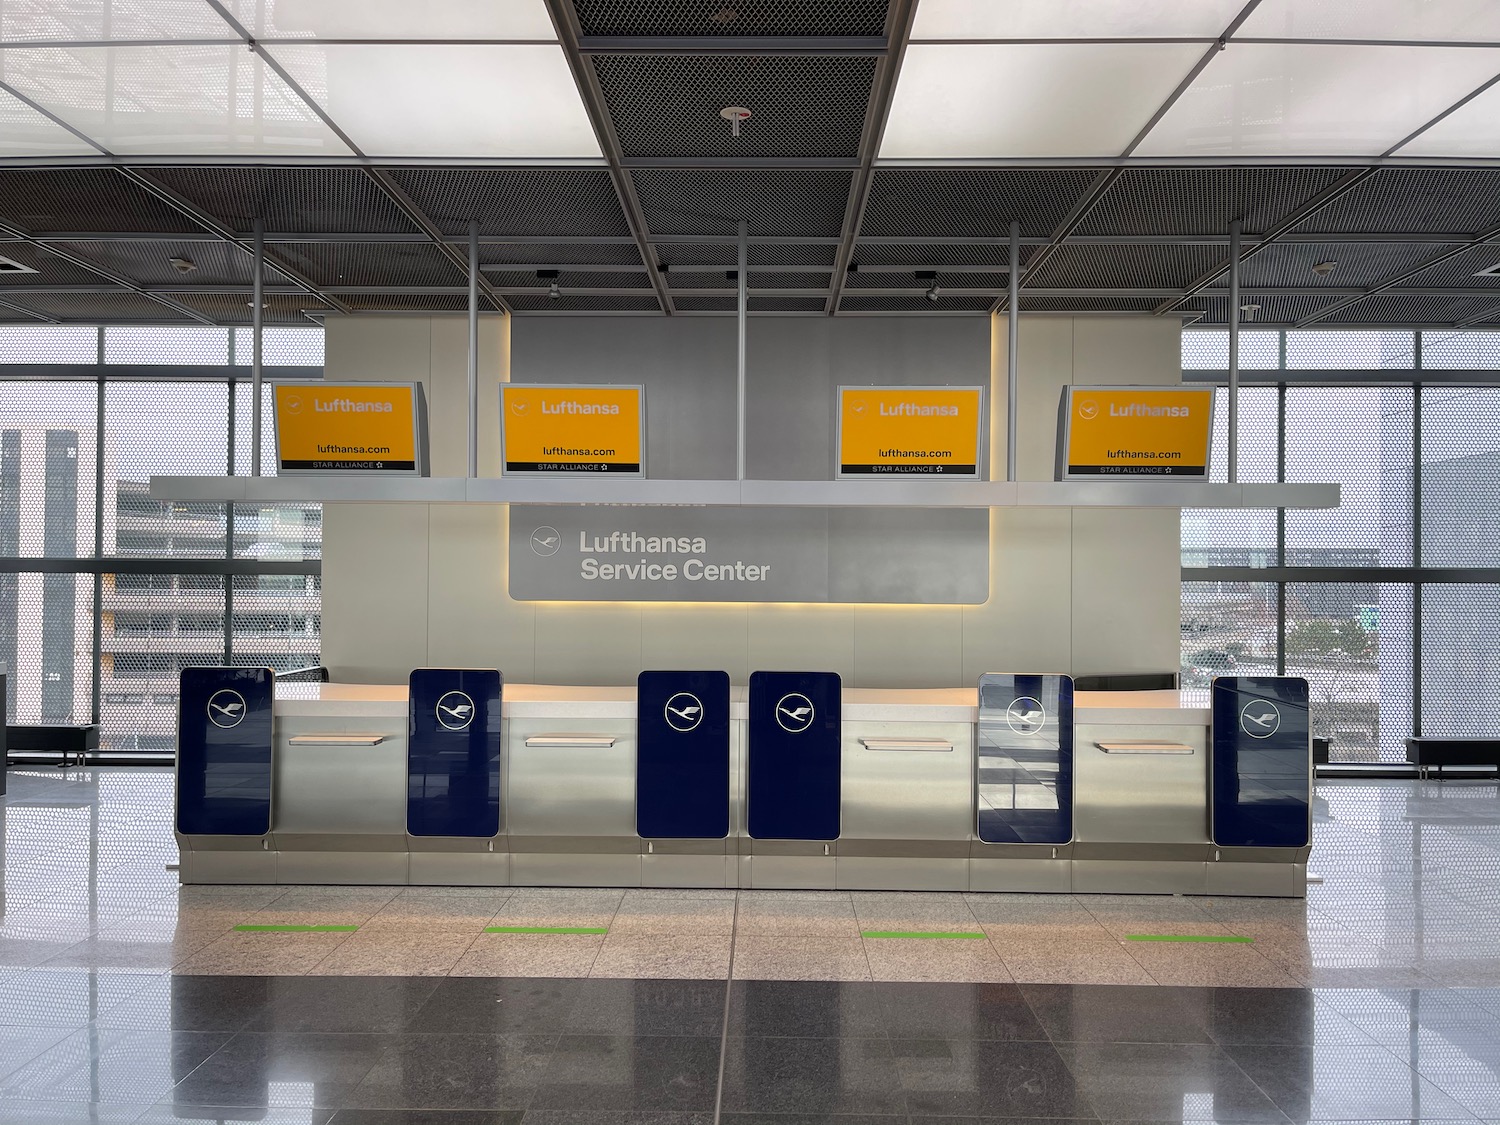 Lufthansa Ticket Counter Horror Story - Live and Let's Fly